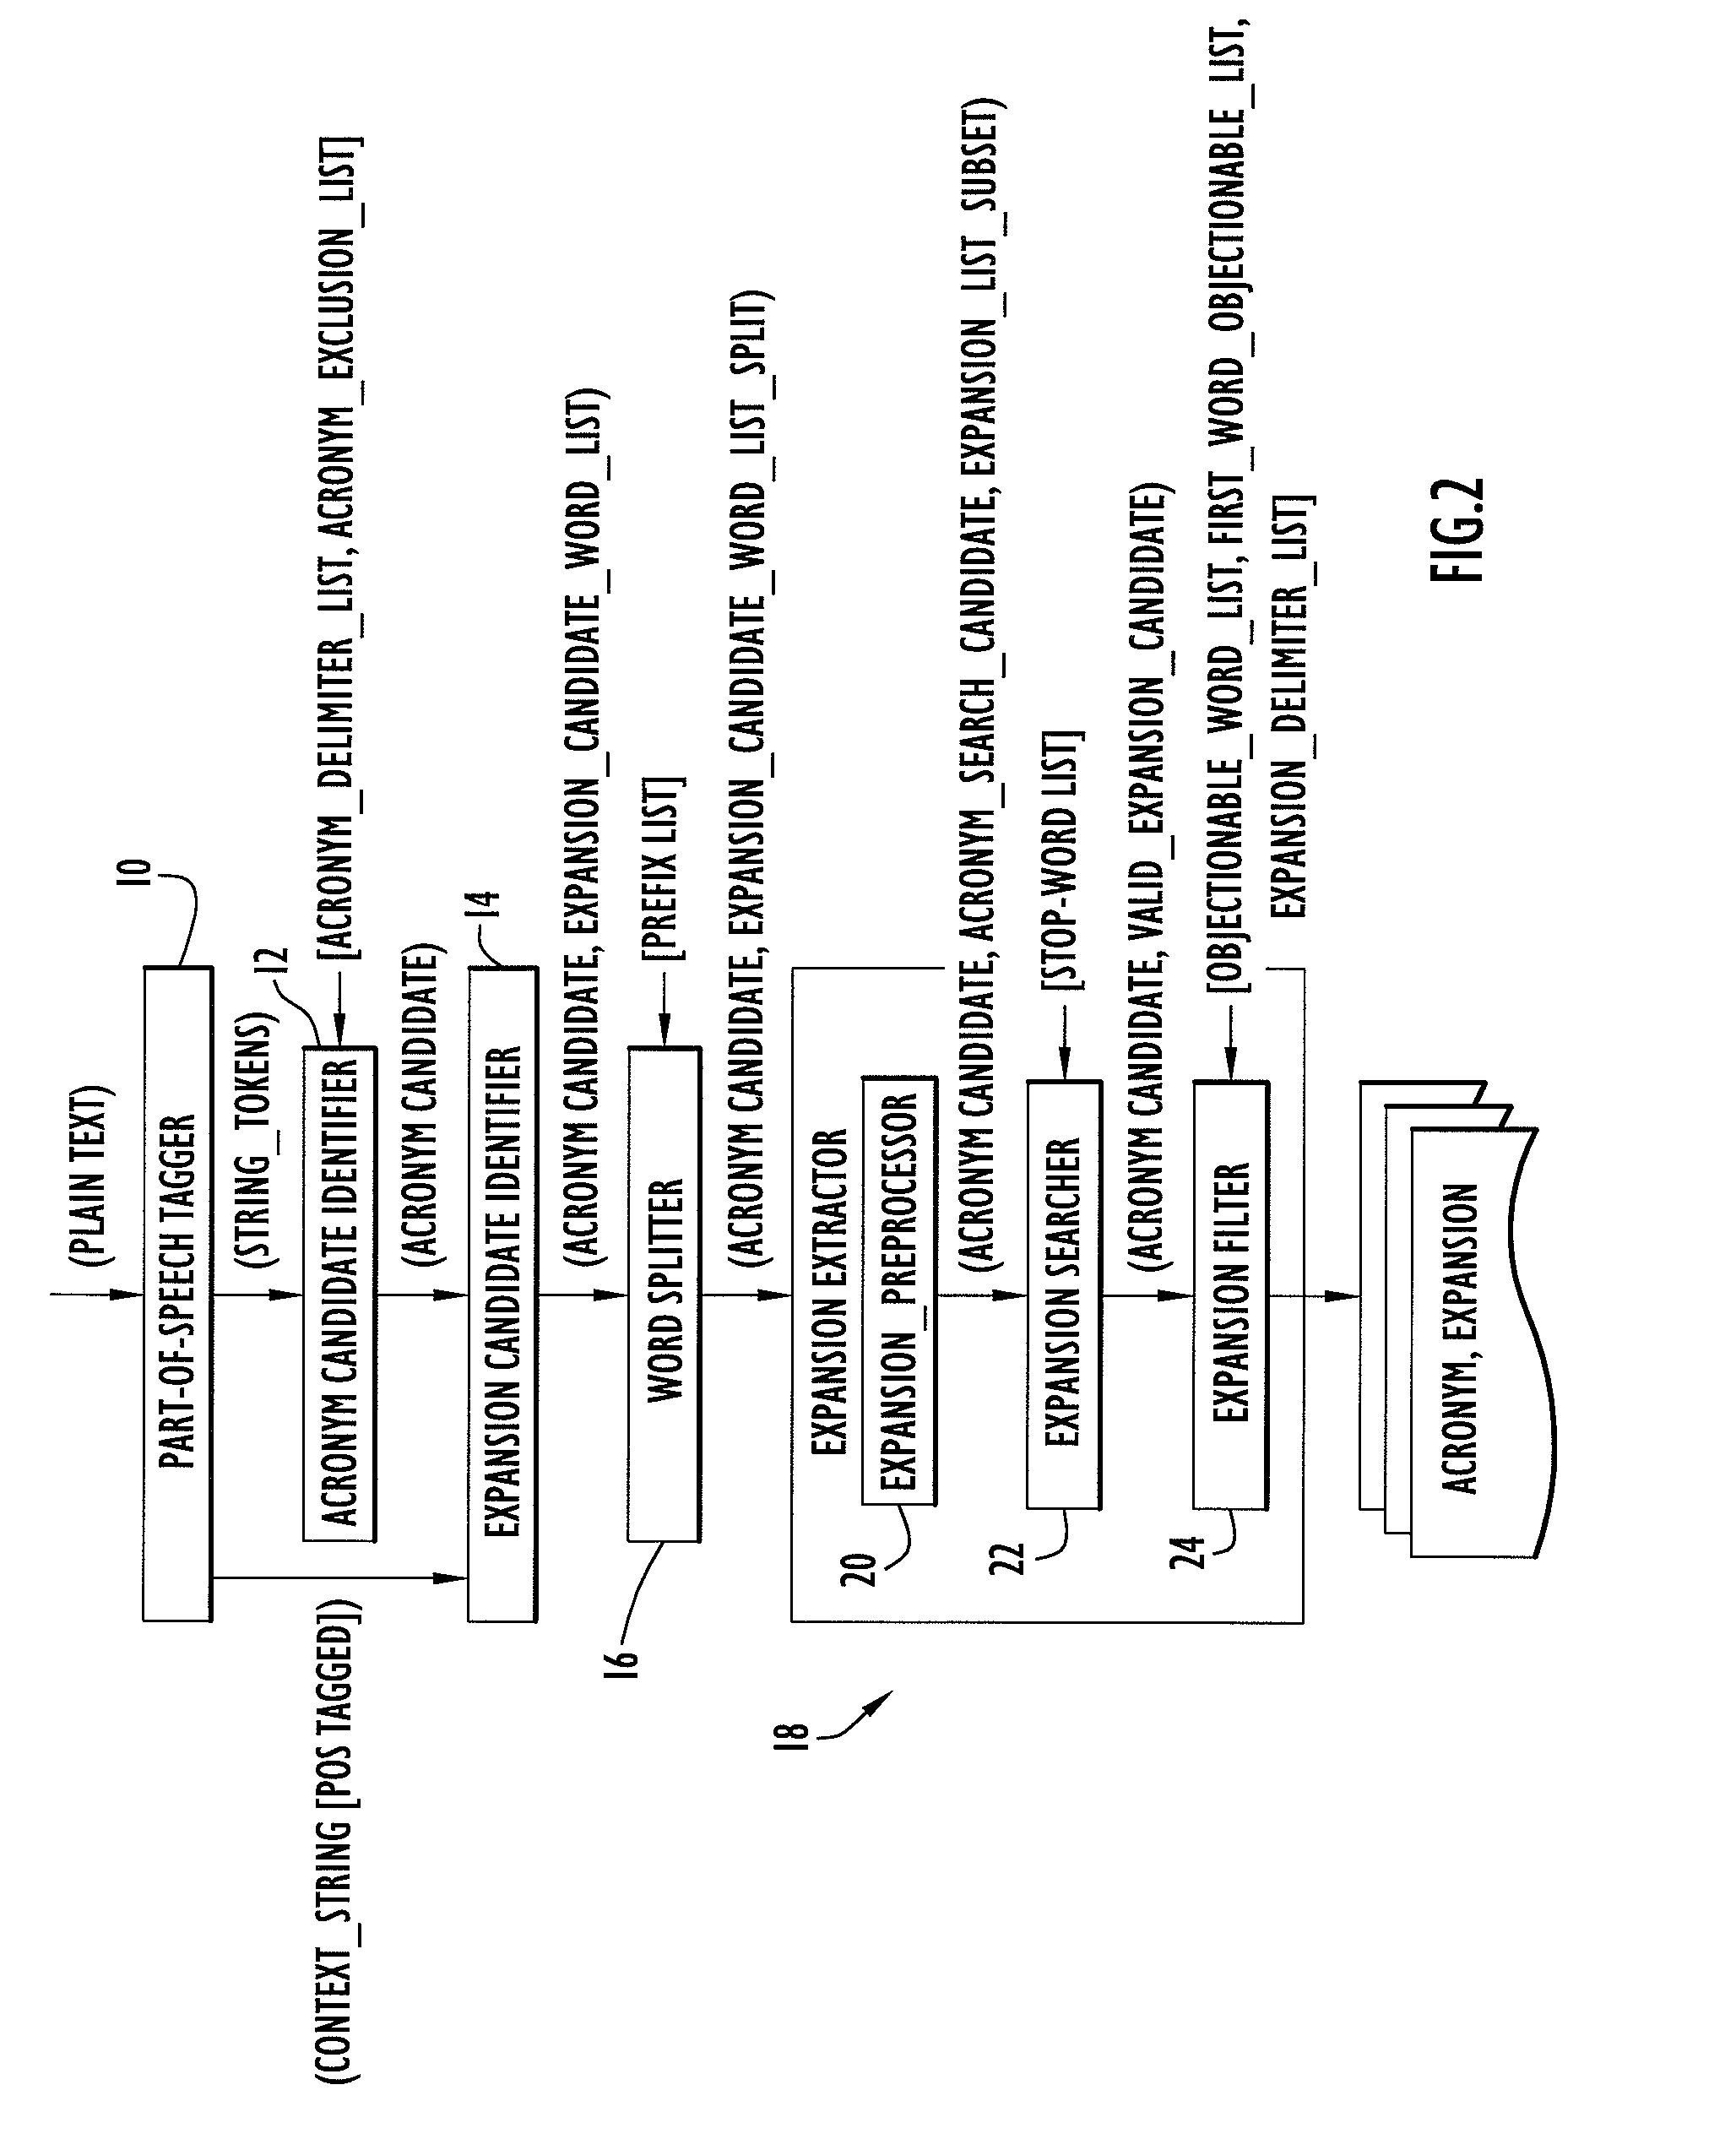 Acronym Extraction System and Method of Identifying Acronyms and Extracting Corresponding Expansions from Text